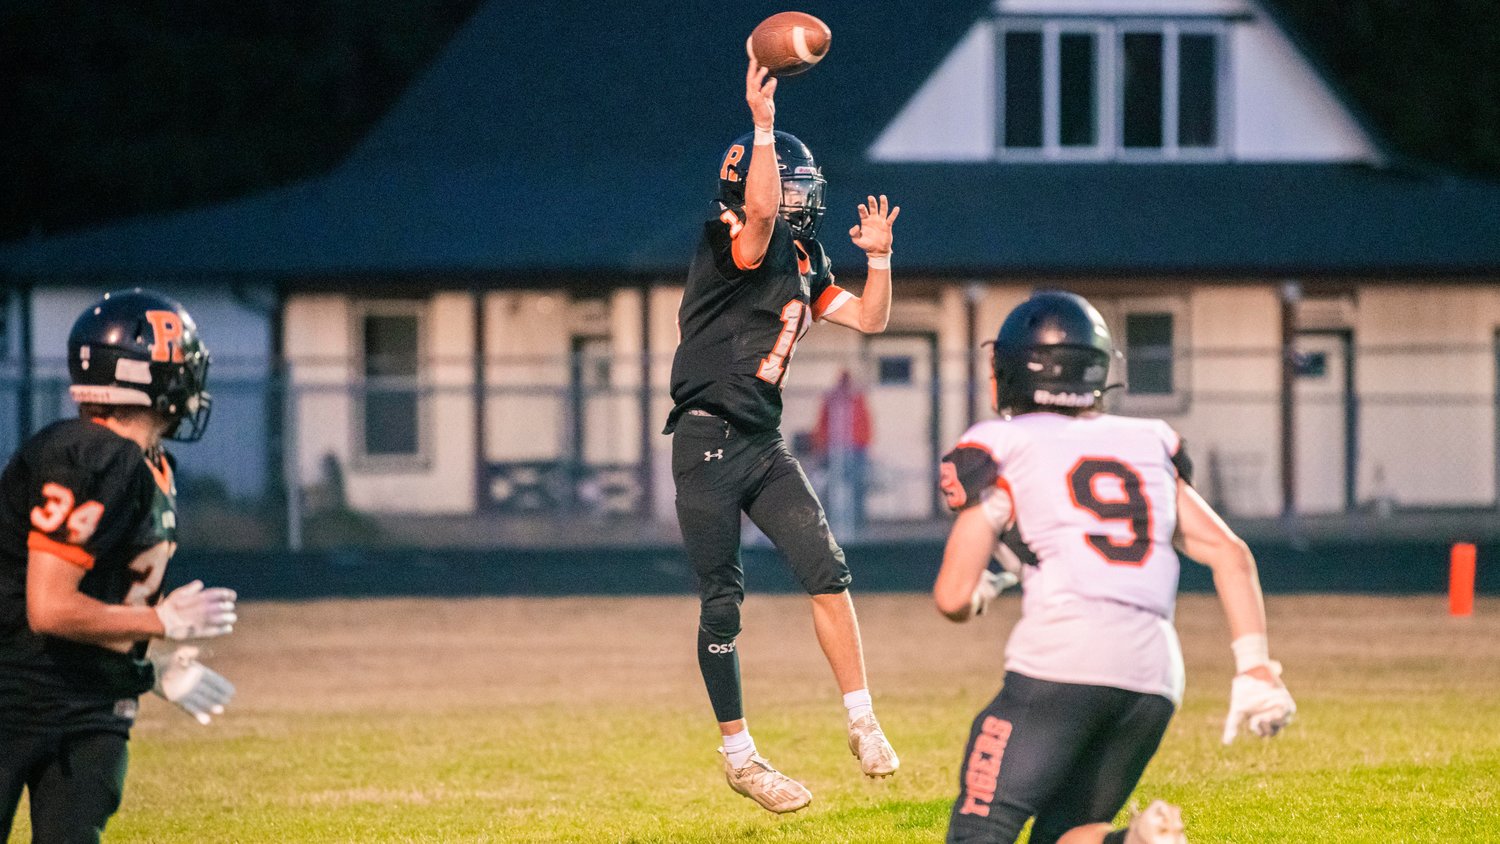 Rainier quarterback Jake Meldrum (15) leaps and throws a pass during a game Friday night.